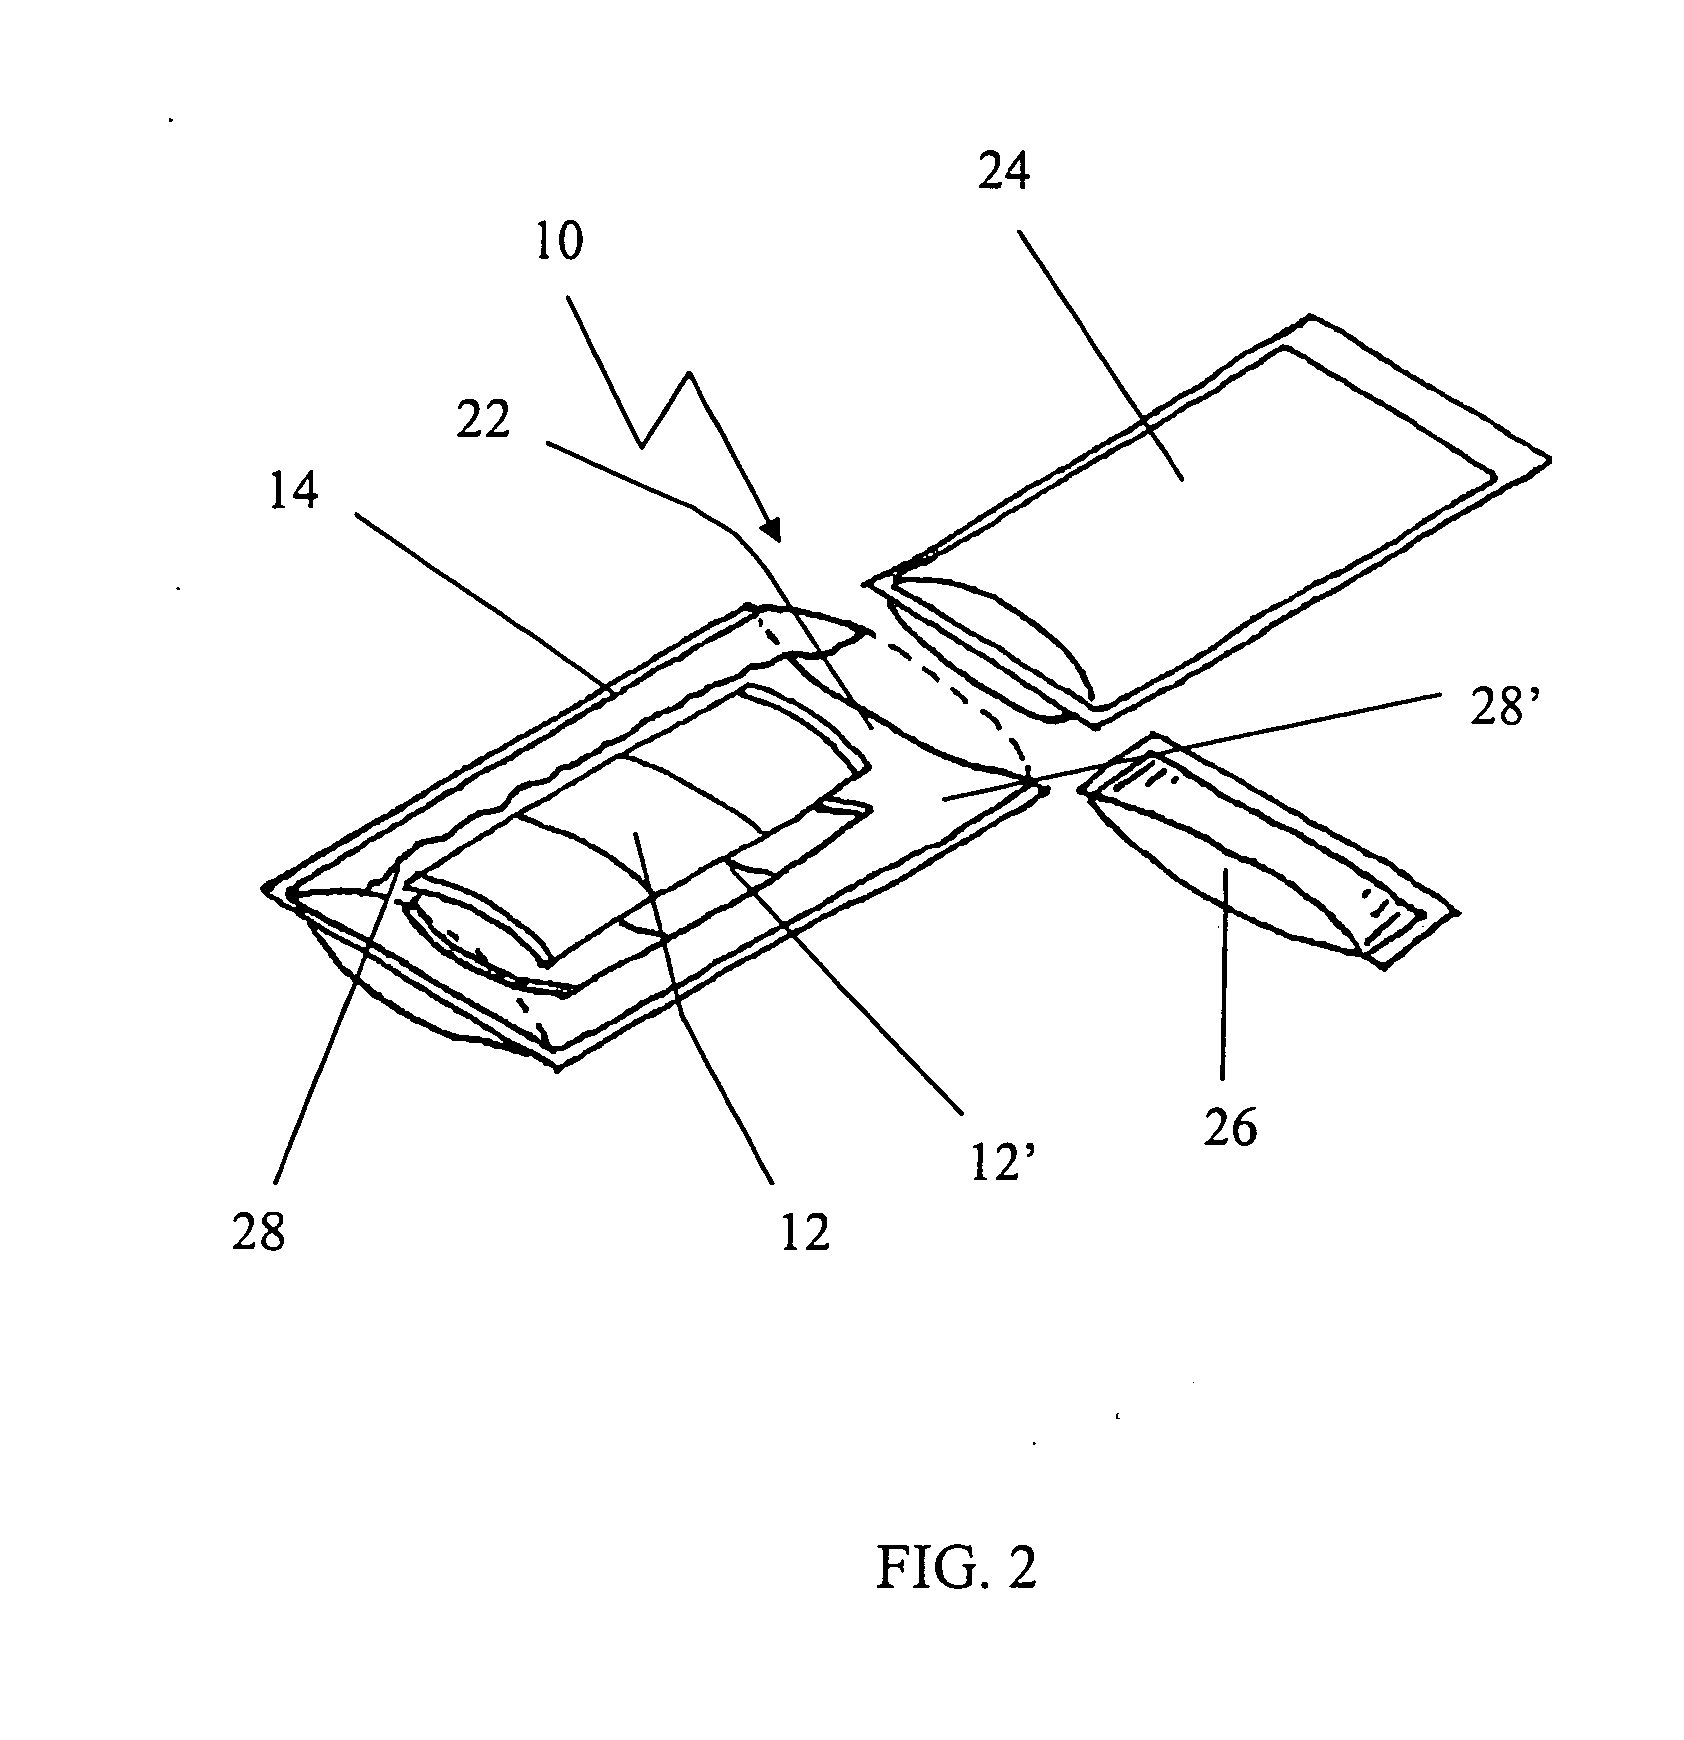 Portable heating apparatus and metal fuel composite for use with same